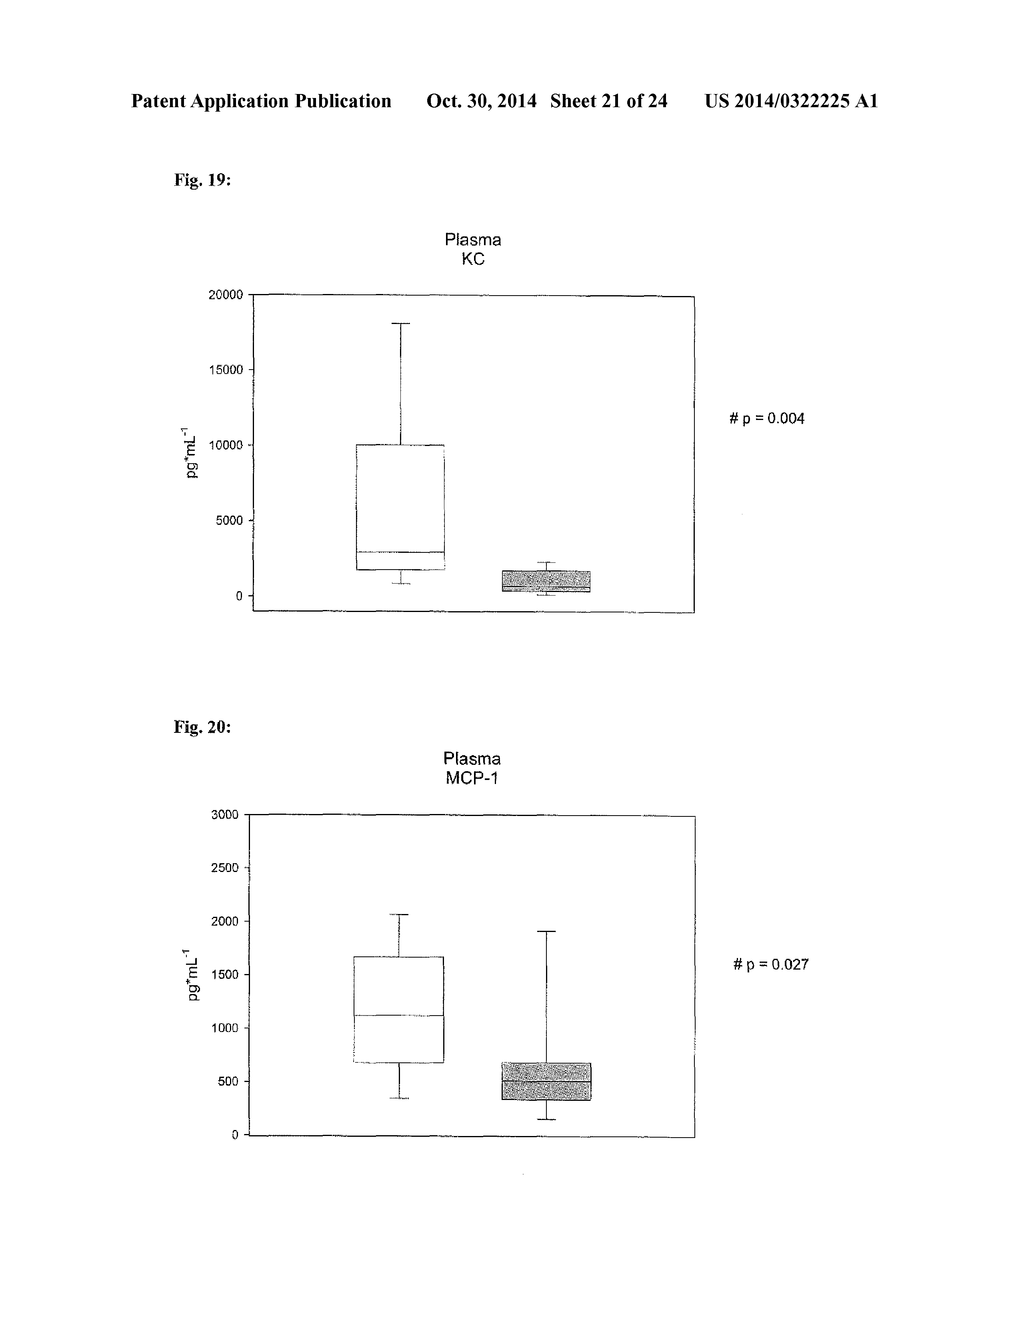 Anti-Adrenomedullin (ADM) antibody or anti-ADM antibody fragment or     anti-ADM non-Ig scaffold for use in therapy of an acute disease or acute     condition of a patient for stabilizing the circulation - diagram, schematic, and image 22